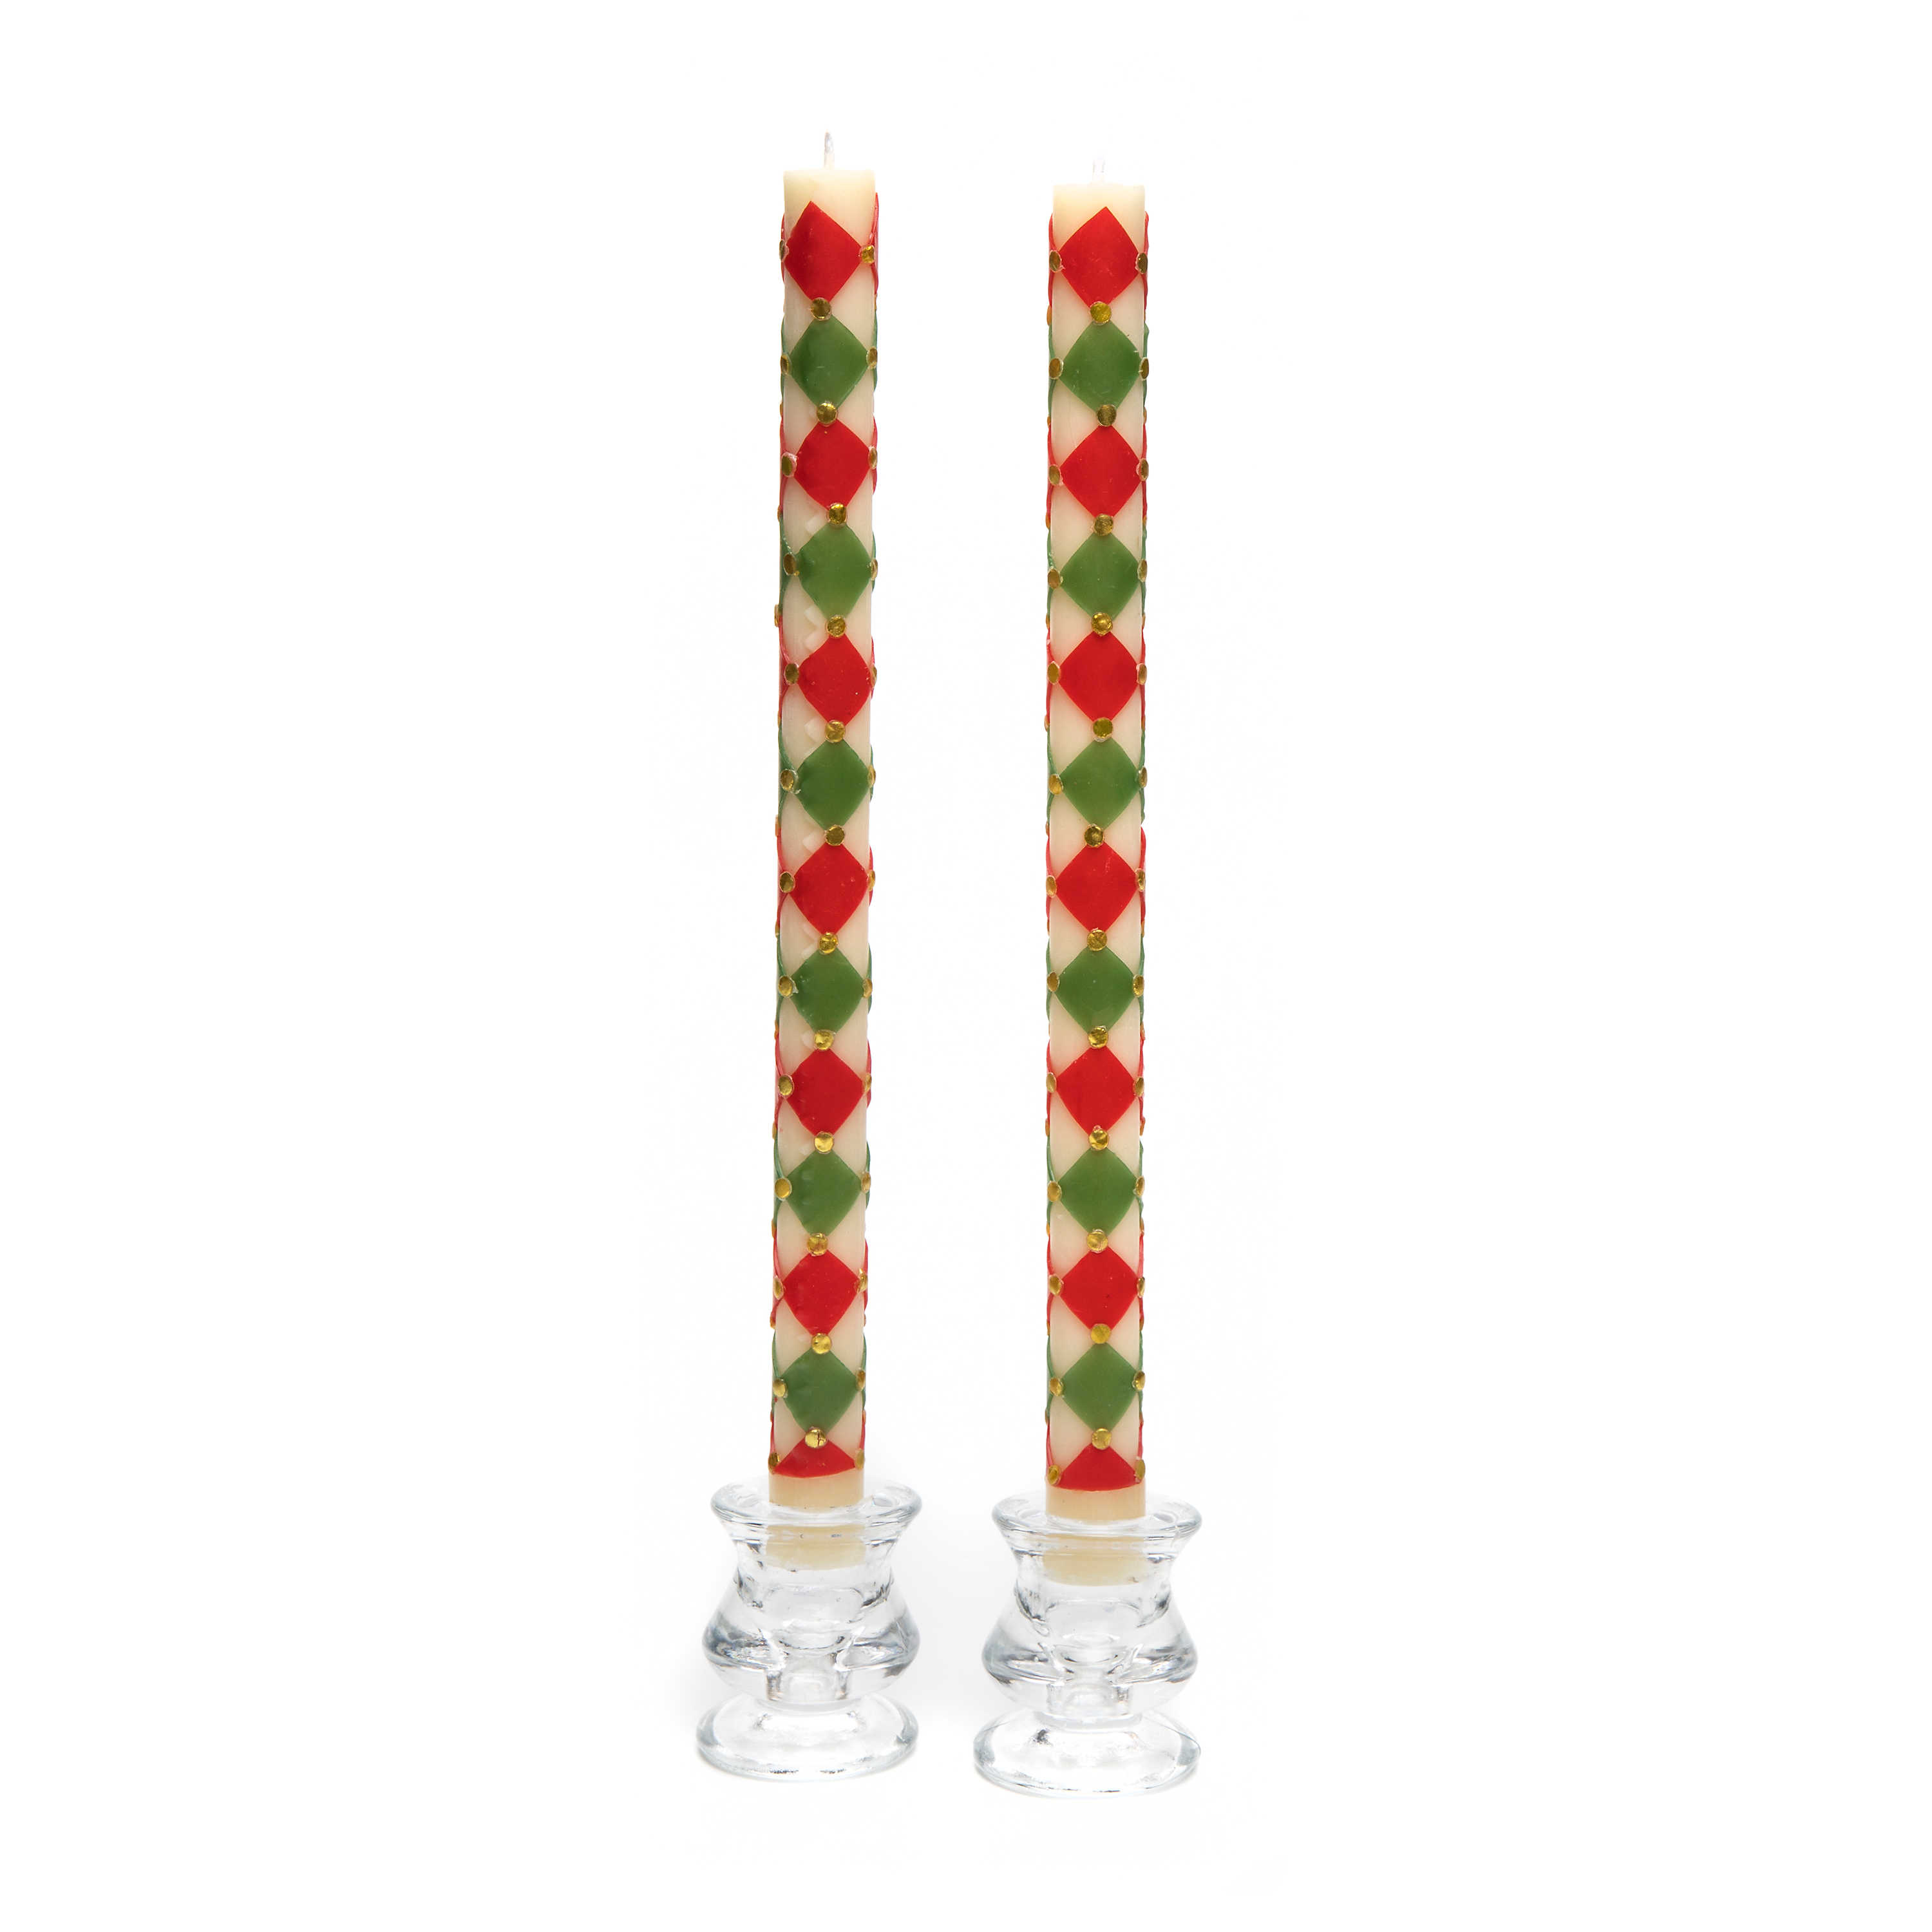 Harlequin Dot Dinner Candles - Red, Green, & Gold - Set of 2 mackenzie-childs Panama 0